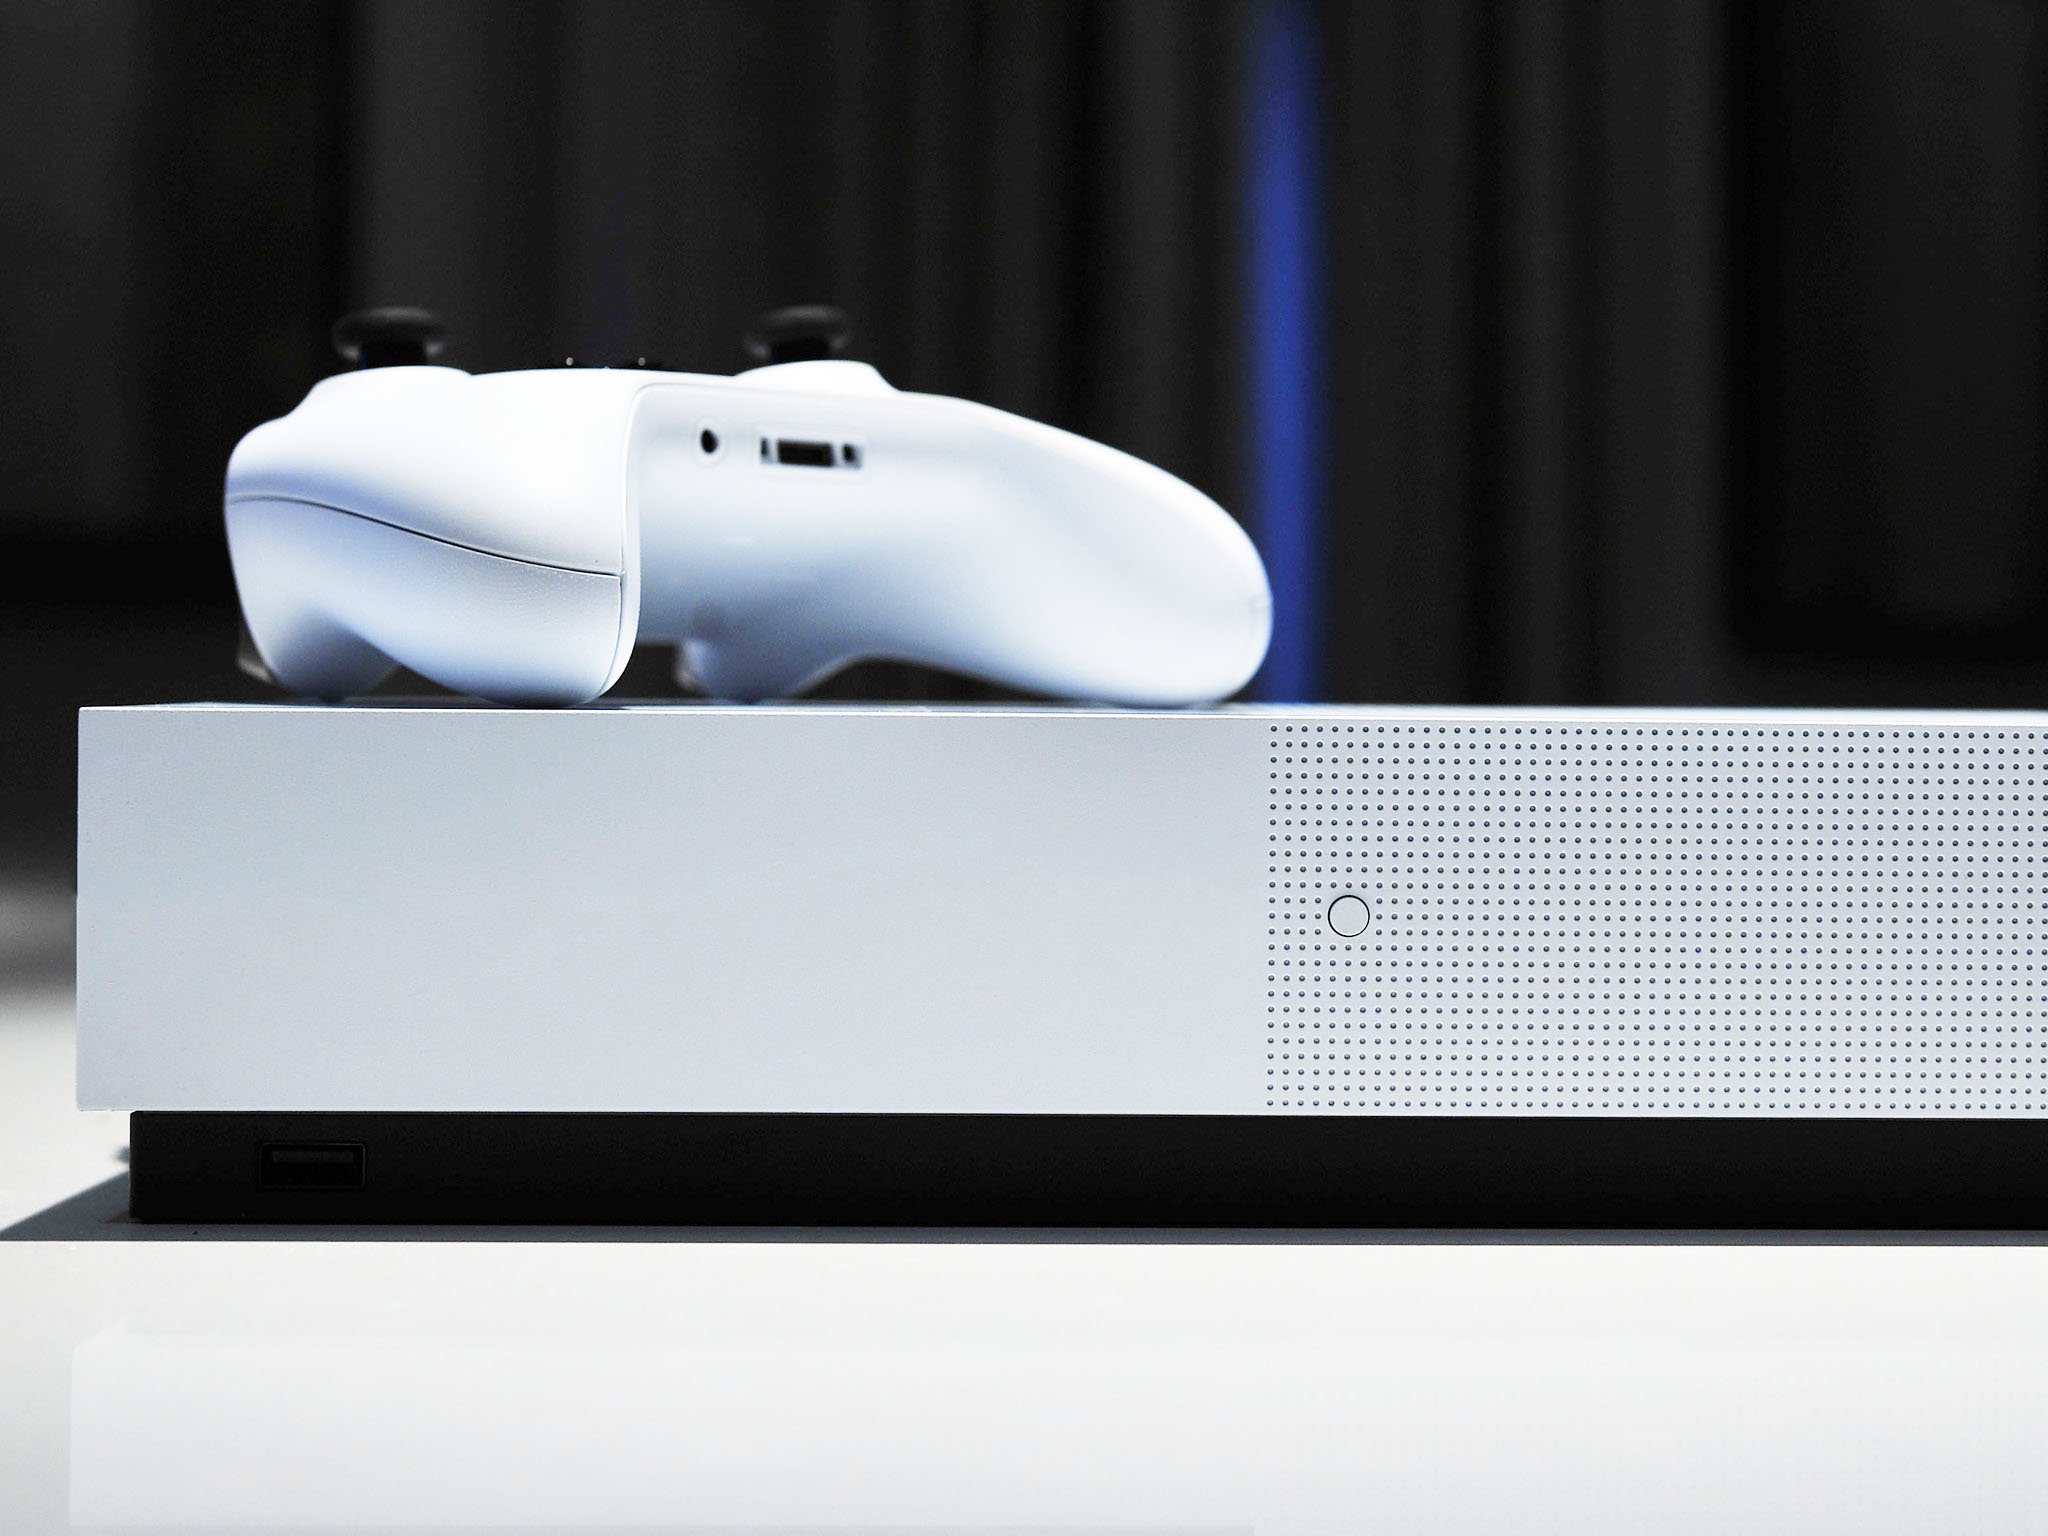 Microsoft's Xbox One S All-Digital Edition is an interesting